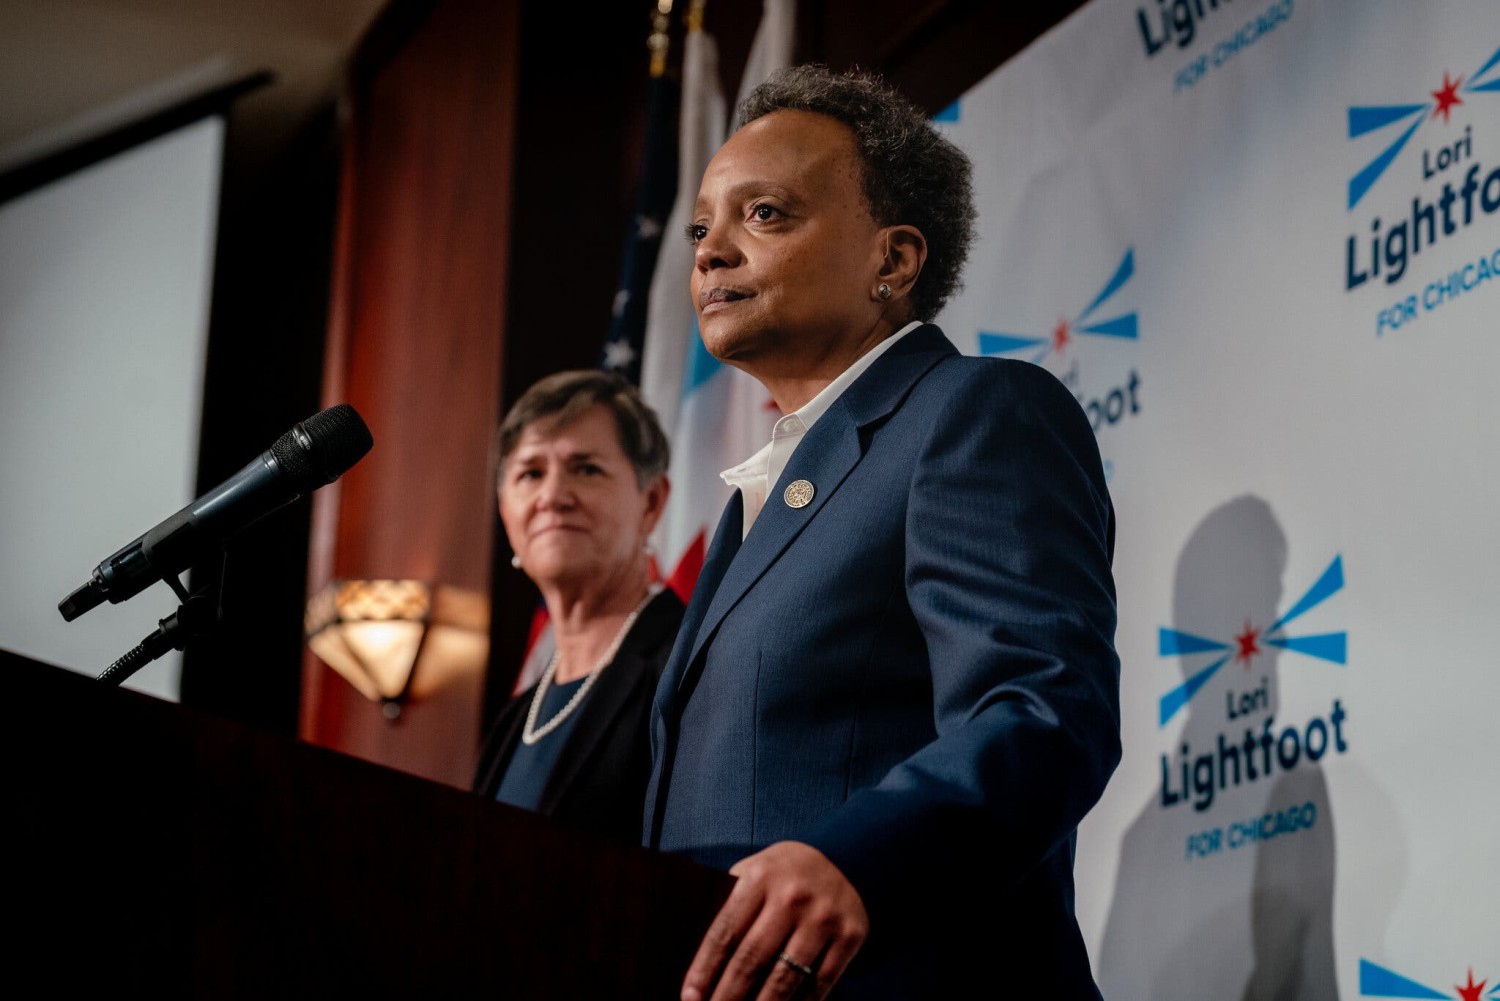 Mayor Lori Lightfoot stood next to her wife, Amy Eshleman, as she conceded the race to her opponents on Tuesday night.Credit...Jamie Kelter Davis for The New York Times